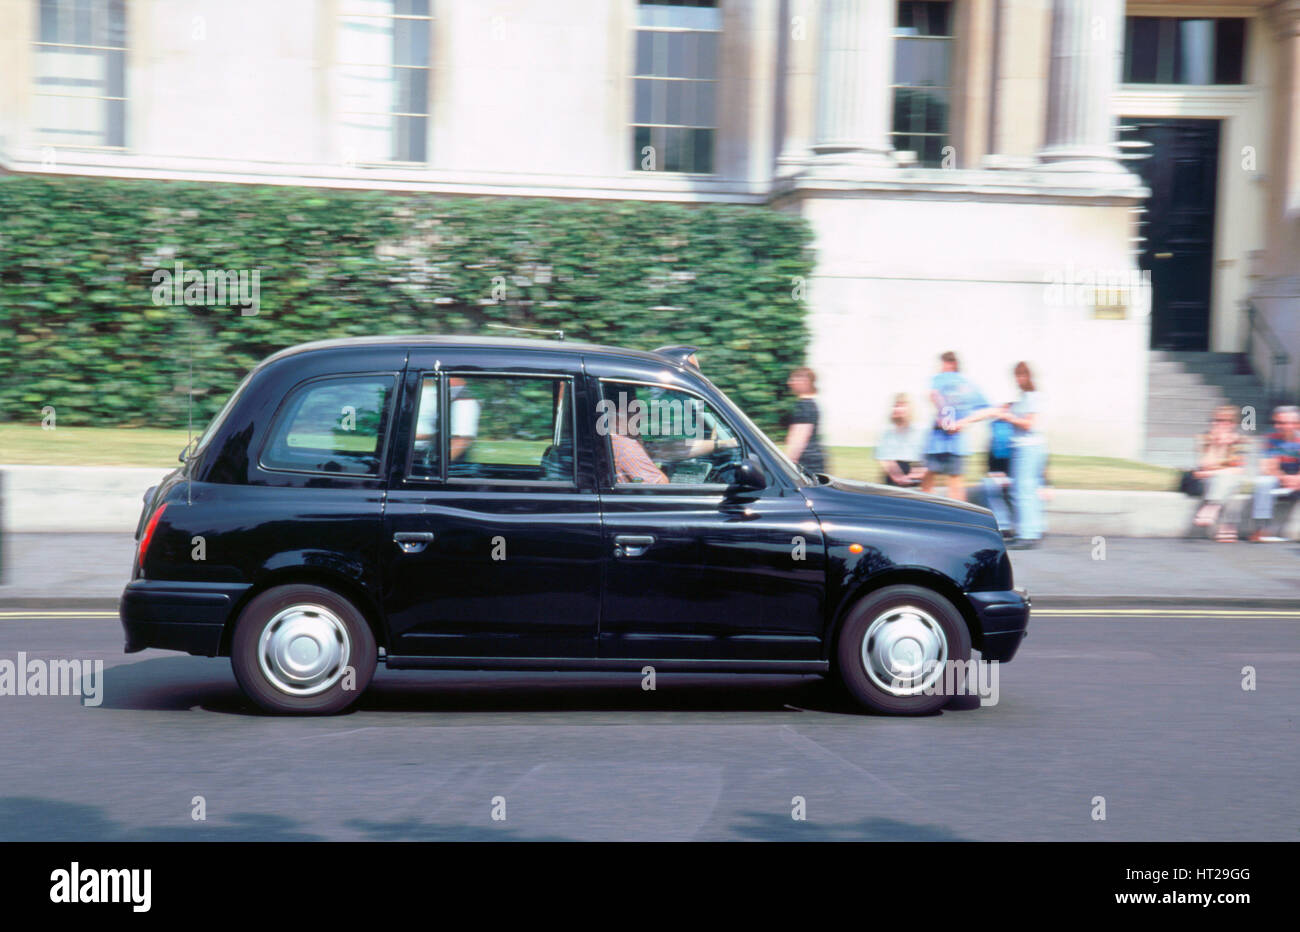 London taxi cab, 1999. Artist: Unknown. Stock Photo